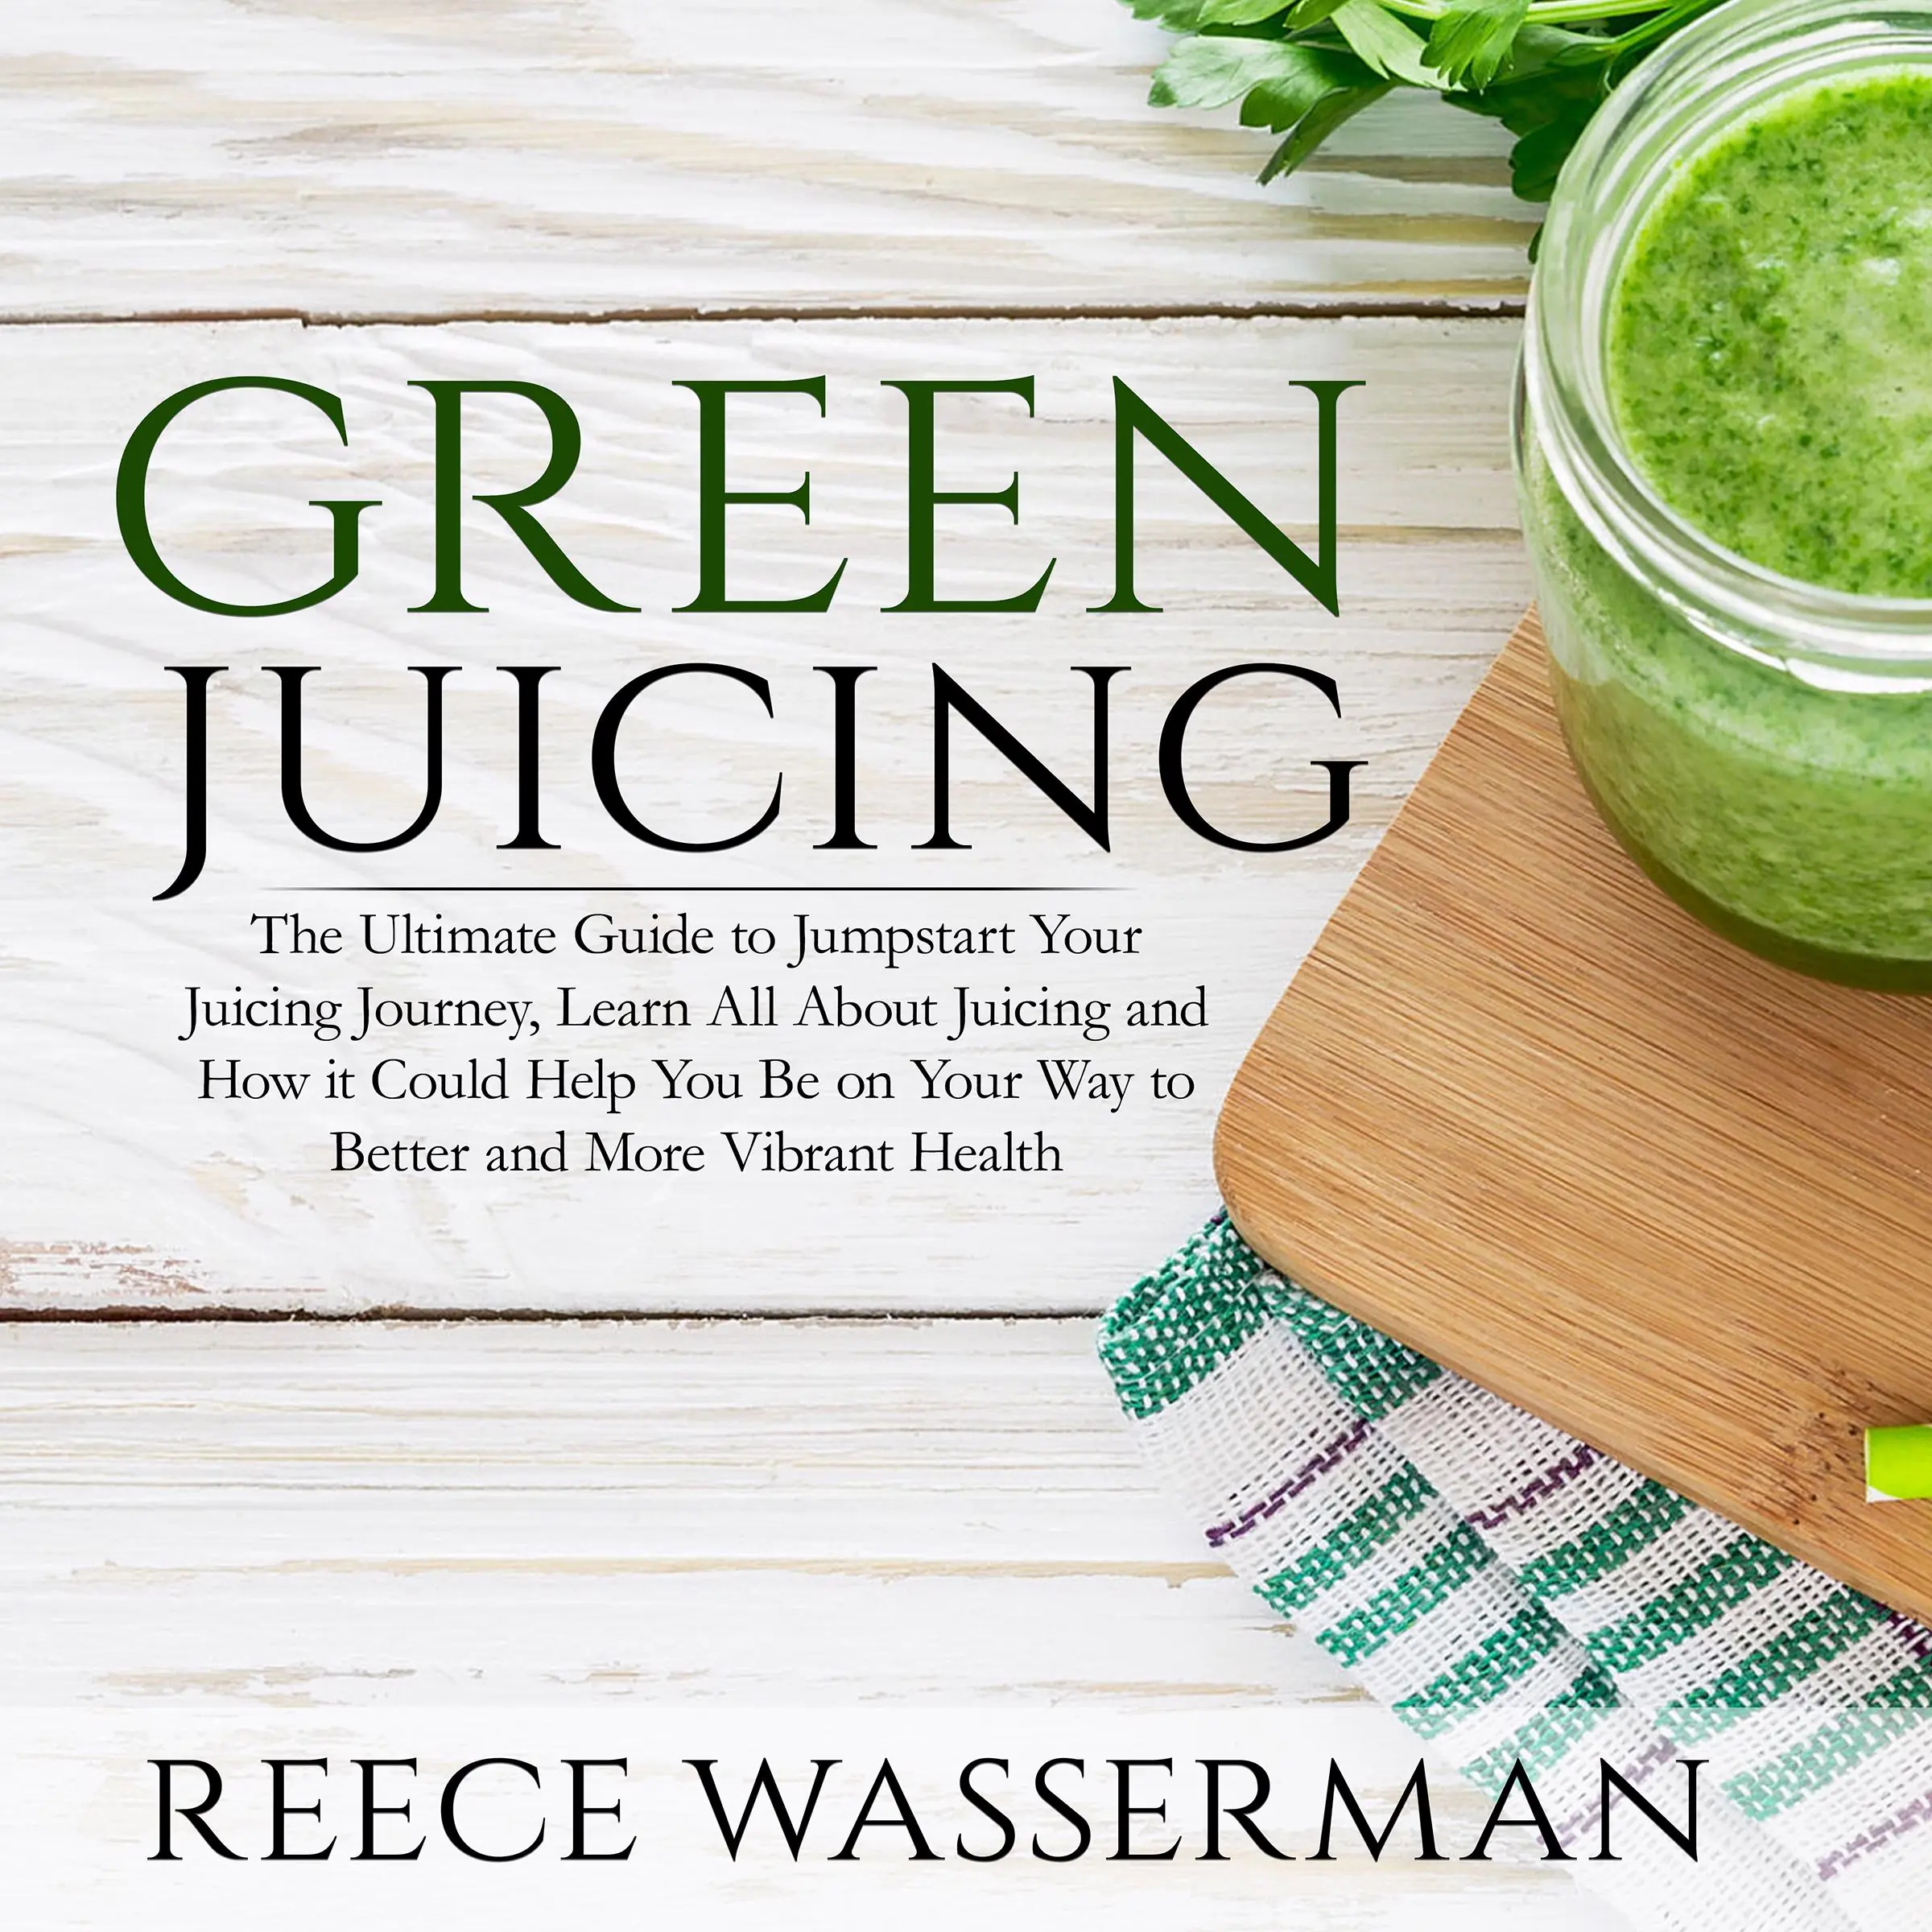 Green Juicing: The Ultimate Guide to Jumpstart Your Juicing Journey, Learn All About Juicing and How it Could Help You Be on Your Way to Better and More Vibrant Health Audiobook by Reece Wasserman